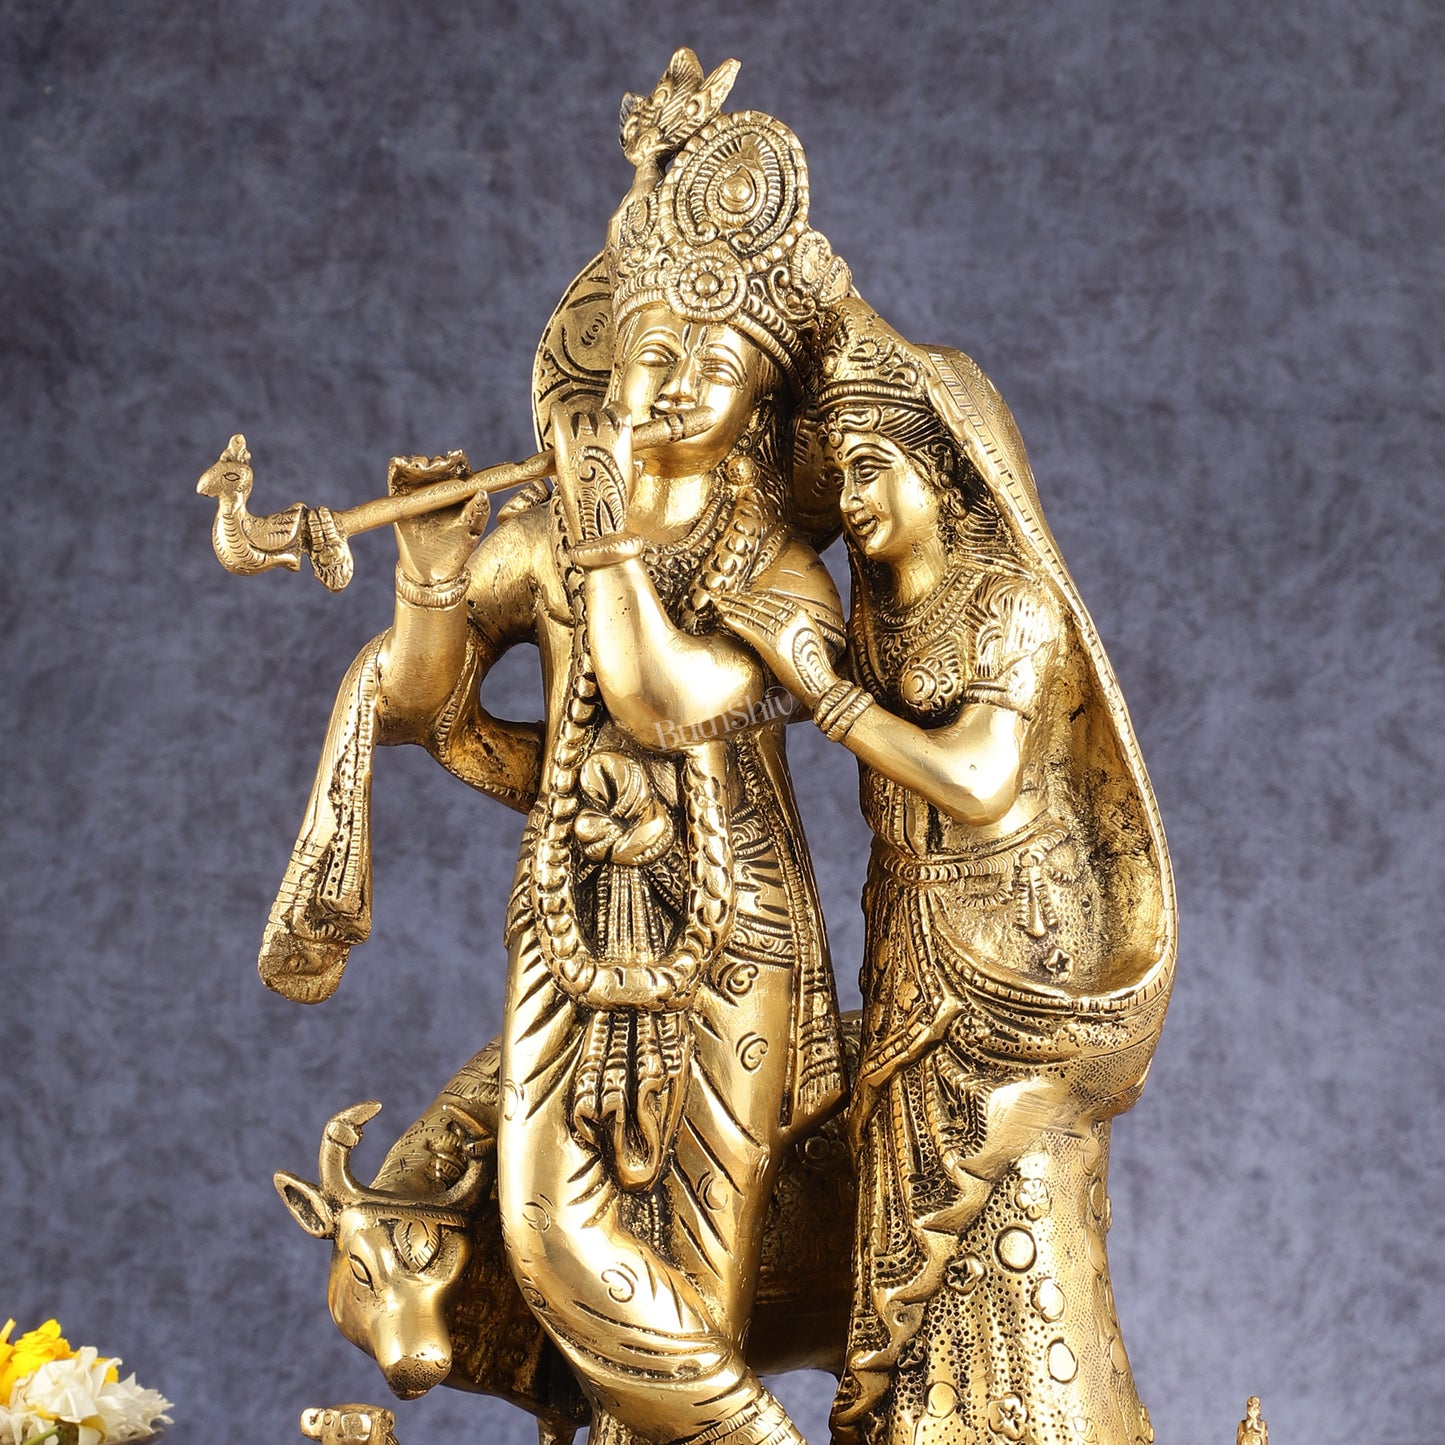 Krishna with Cow, Calf, and Peacock Idol 18 inch